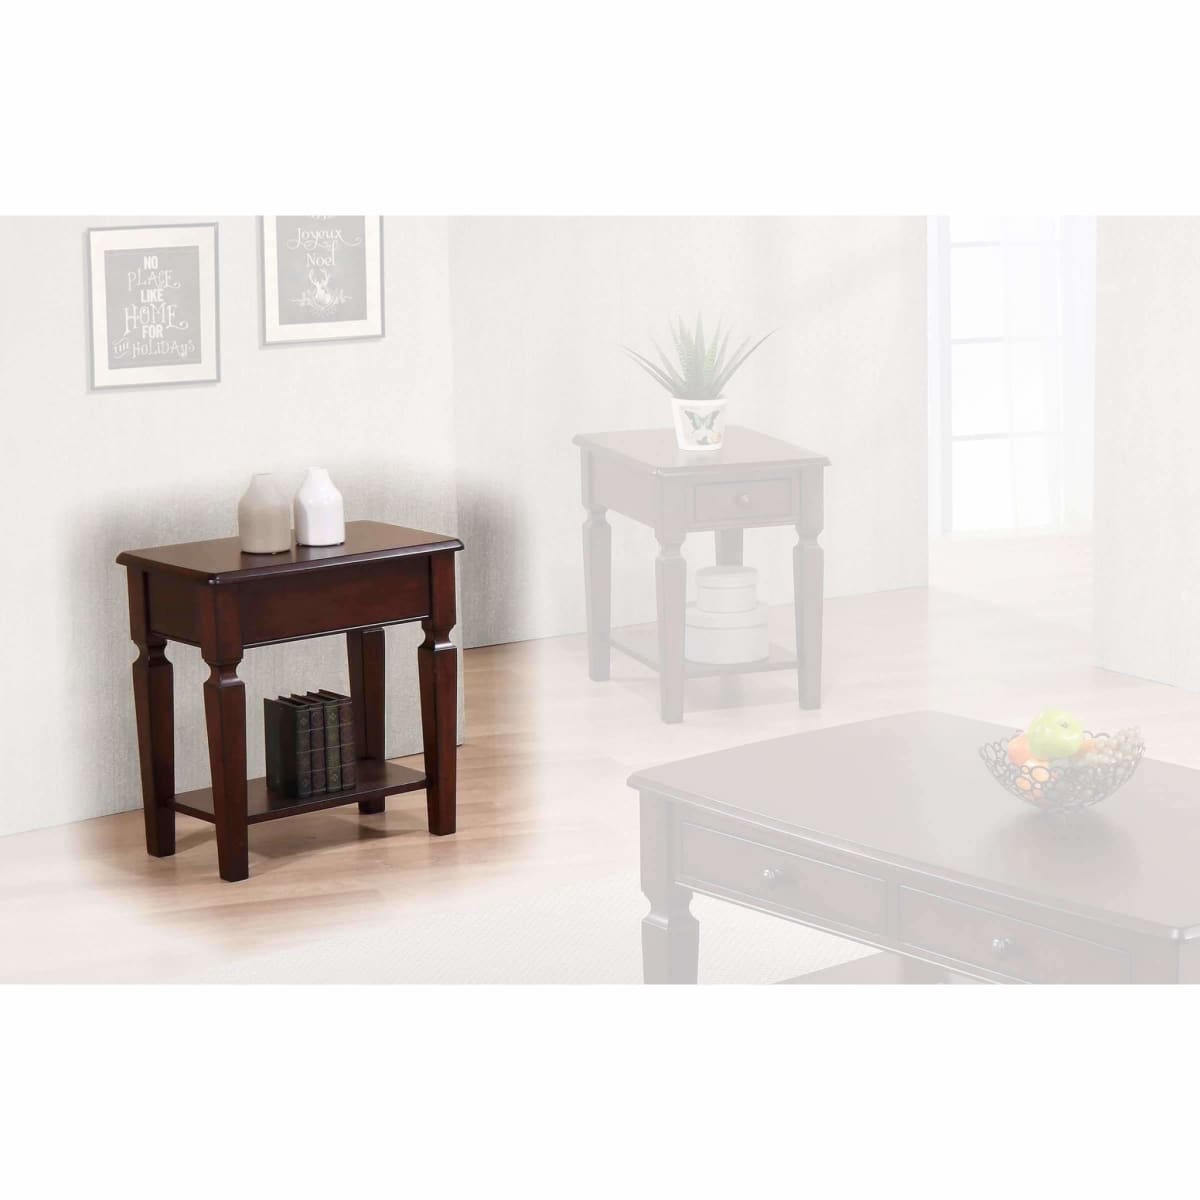 Santa Fe 14 Lamp Table - accent tables